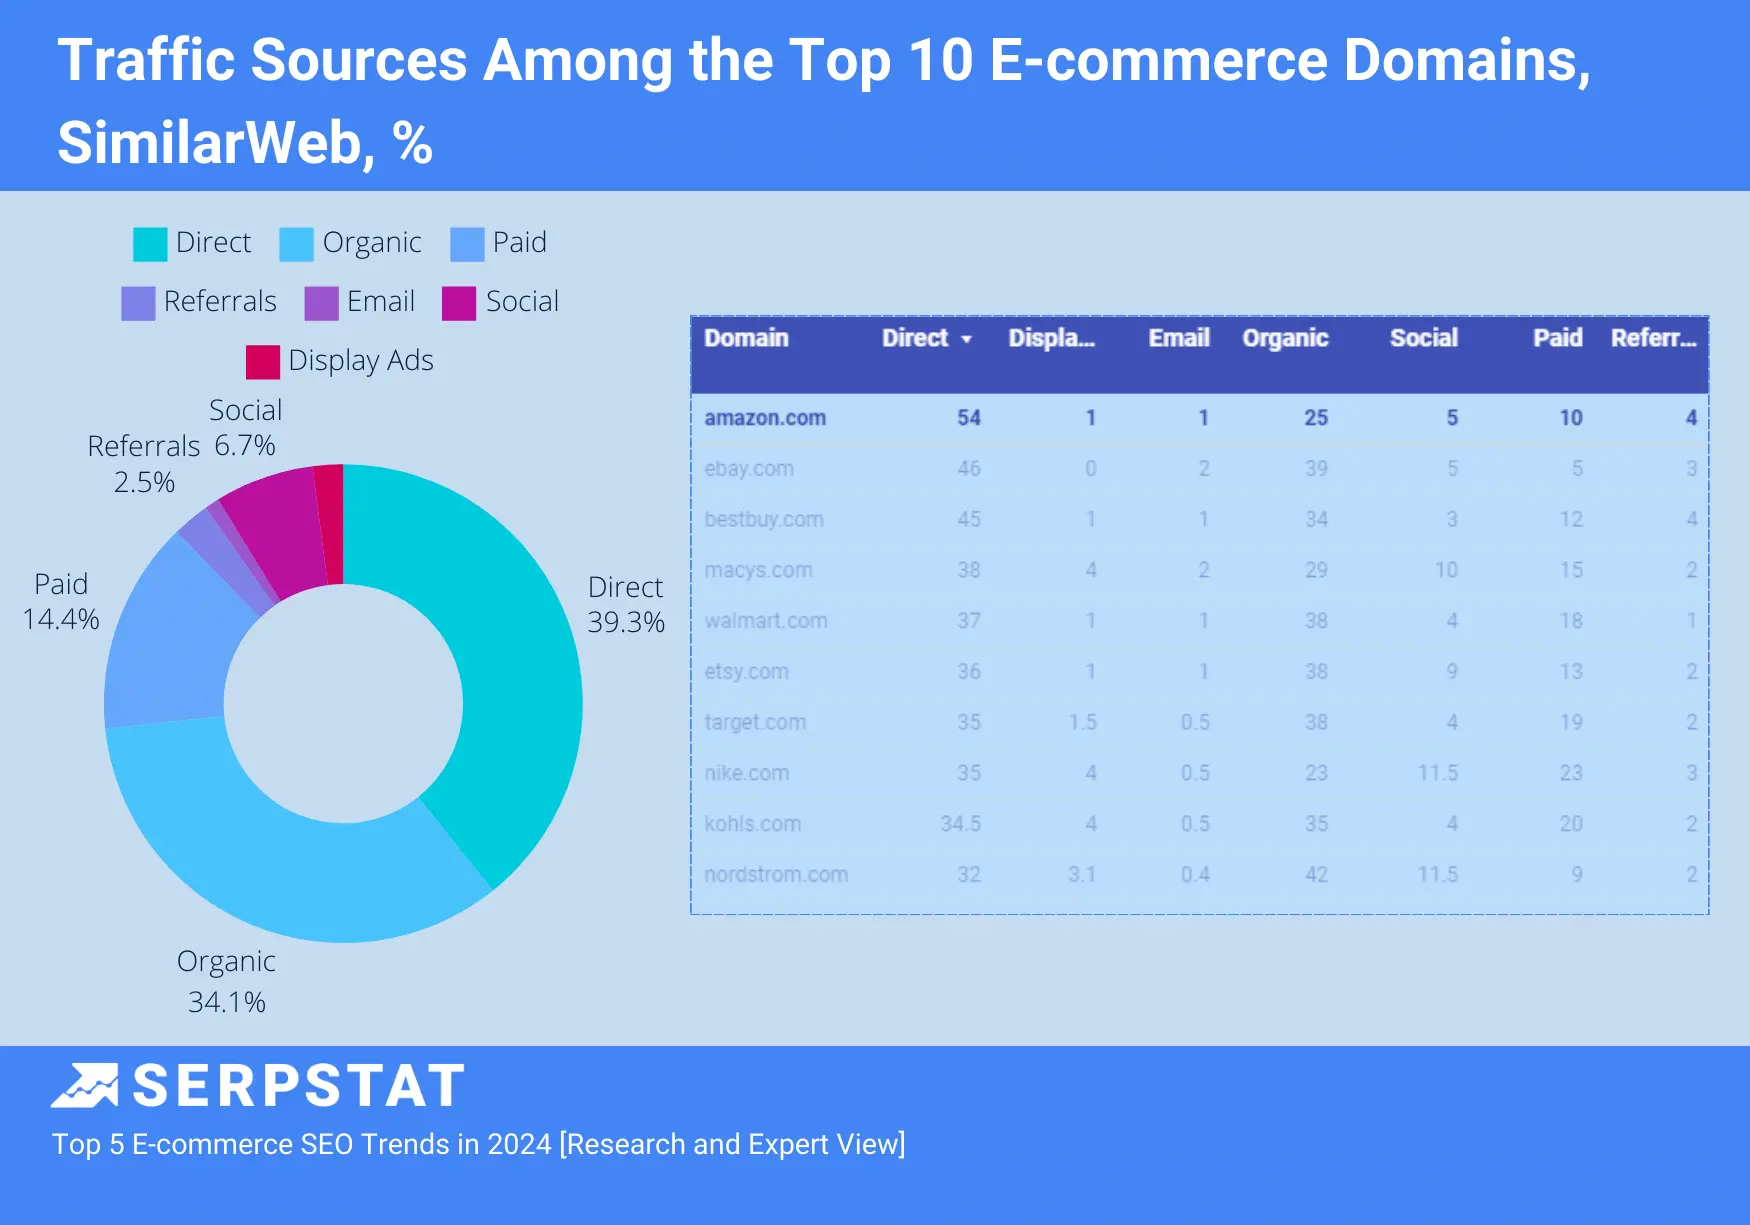 Traffic sources of e-commerce domains